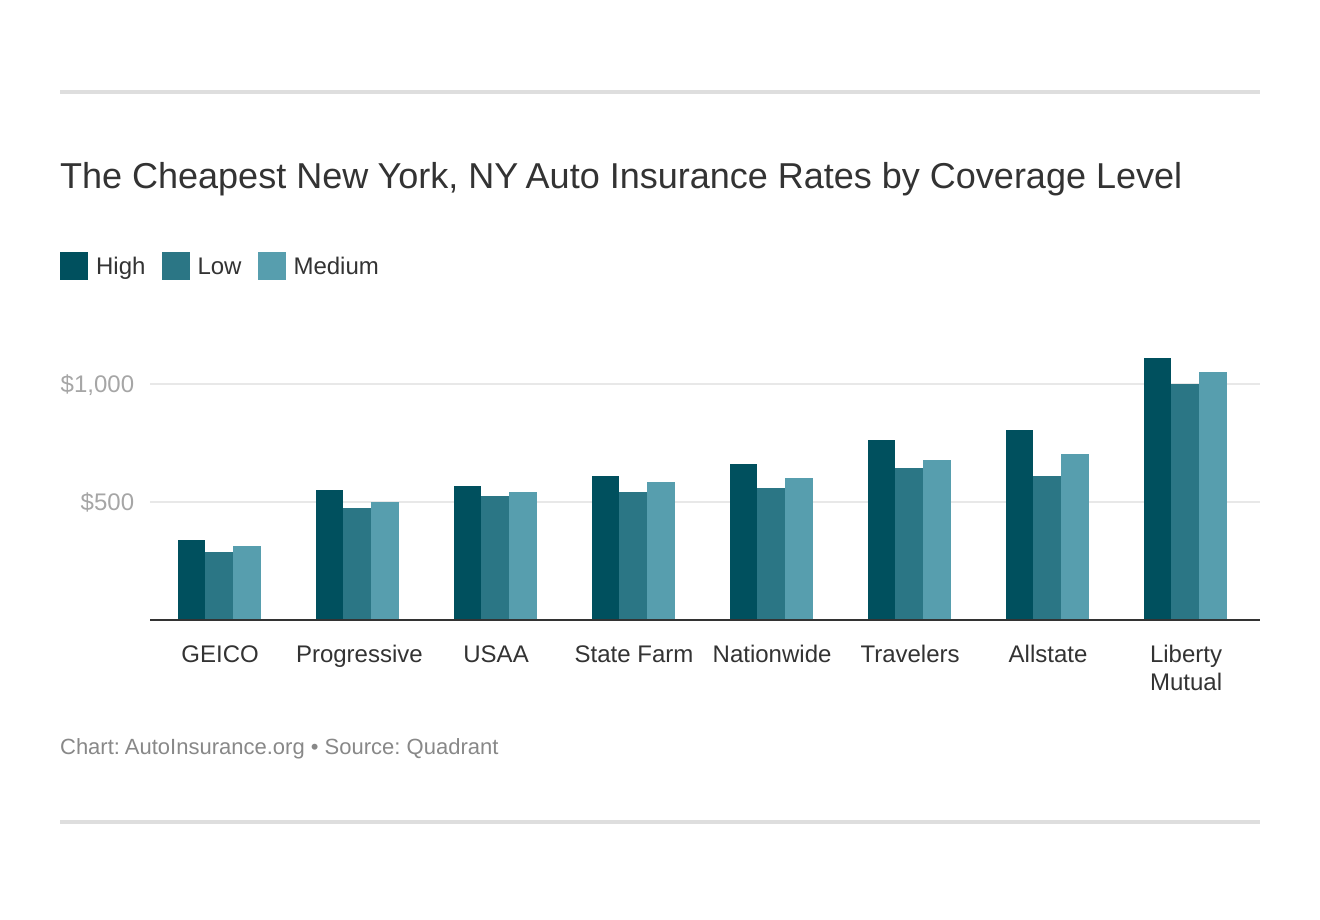 The Cheapest New York, NY Auto Insurance Rates by Coverage Level